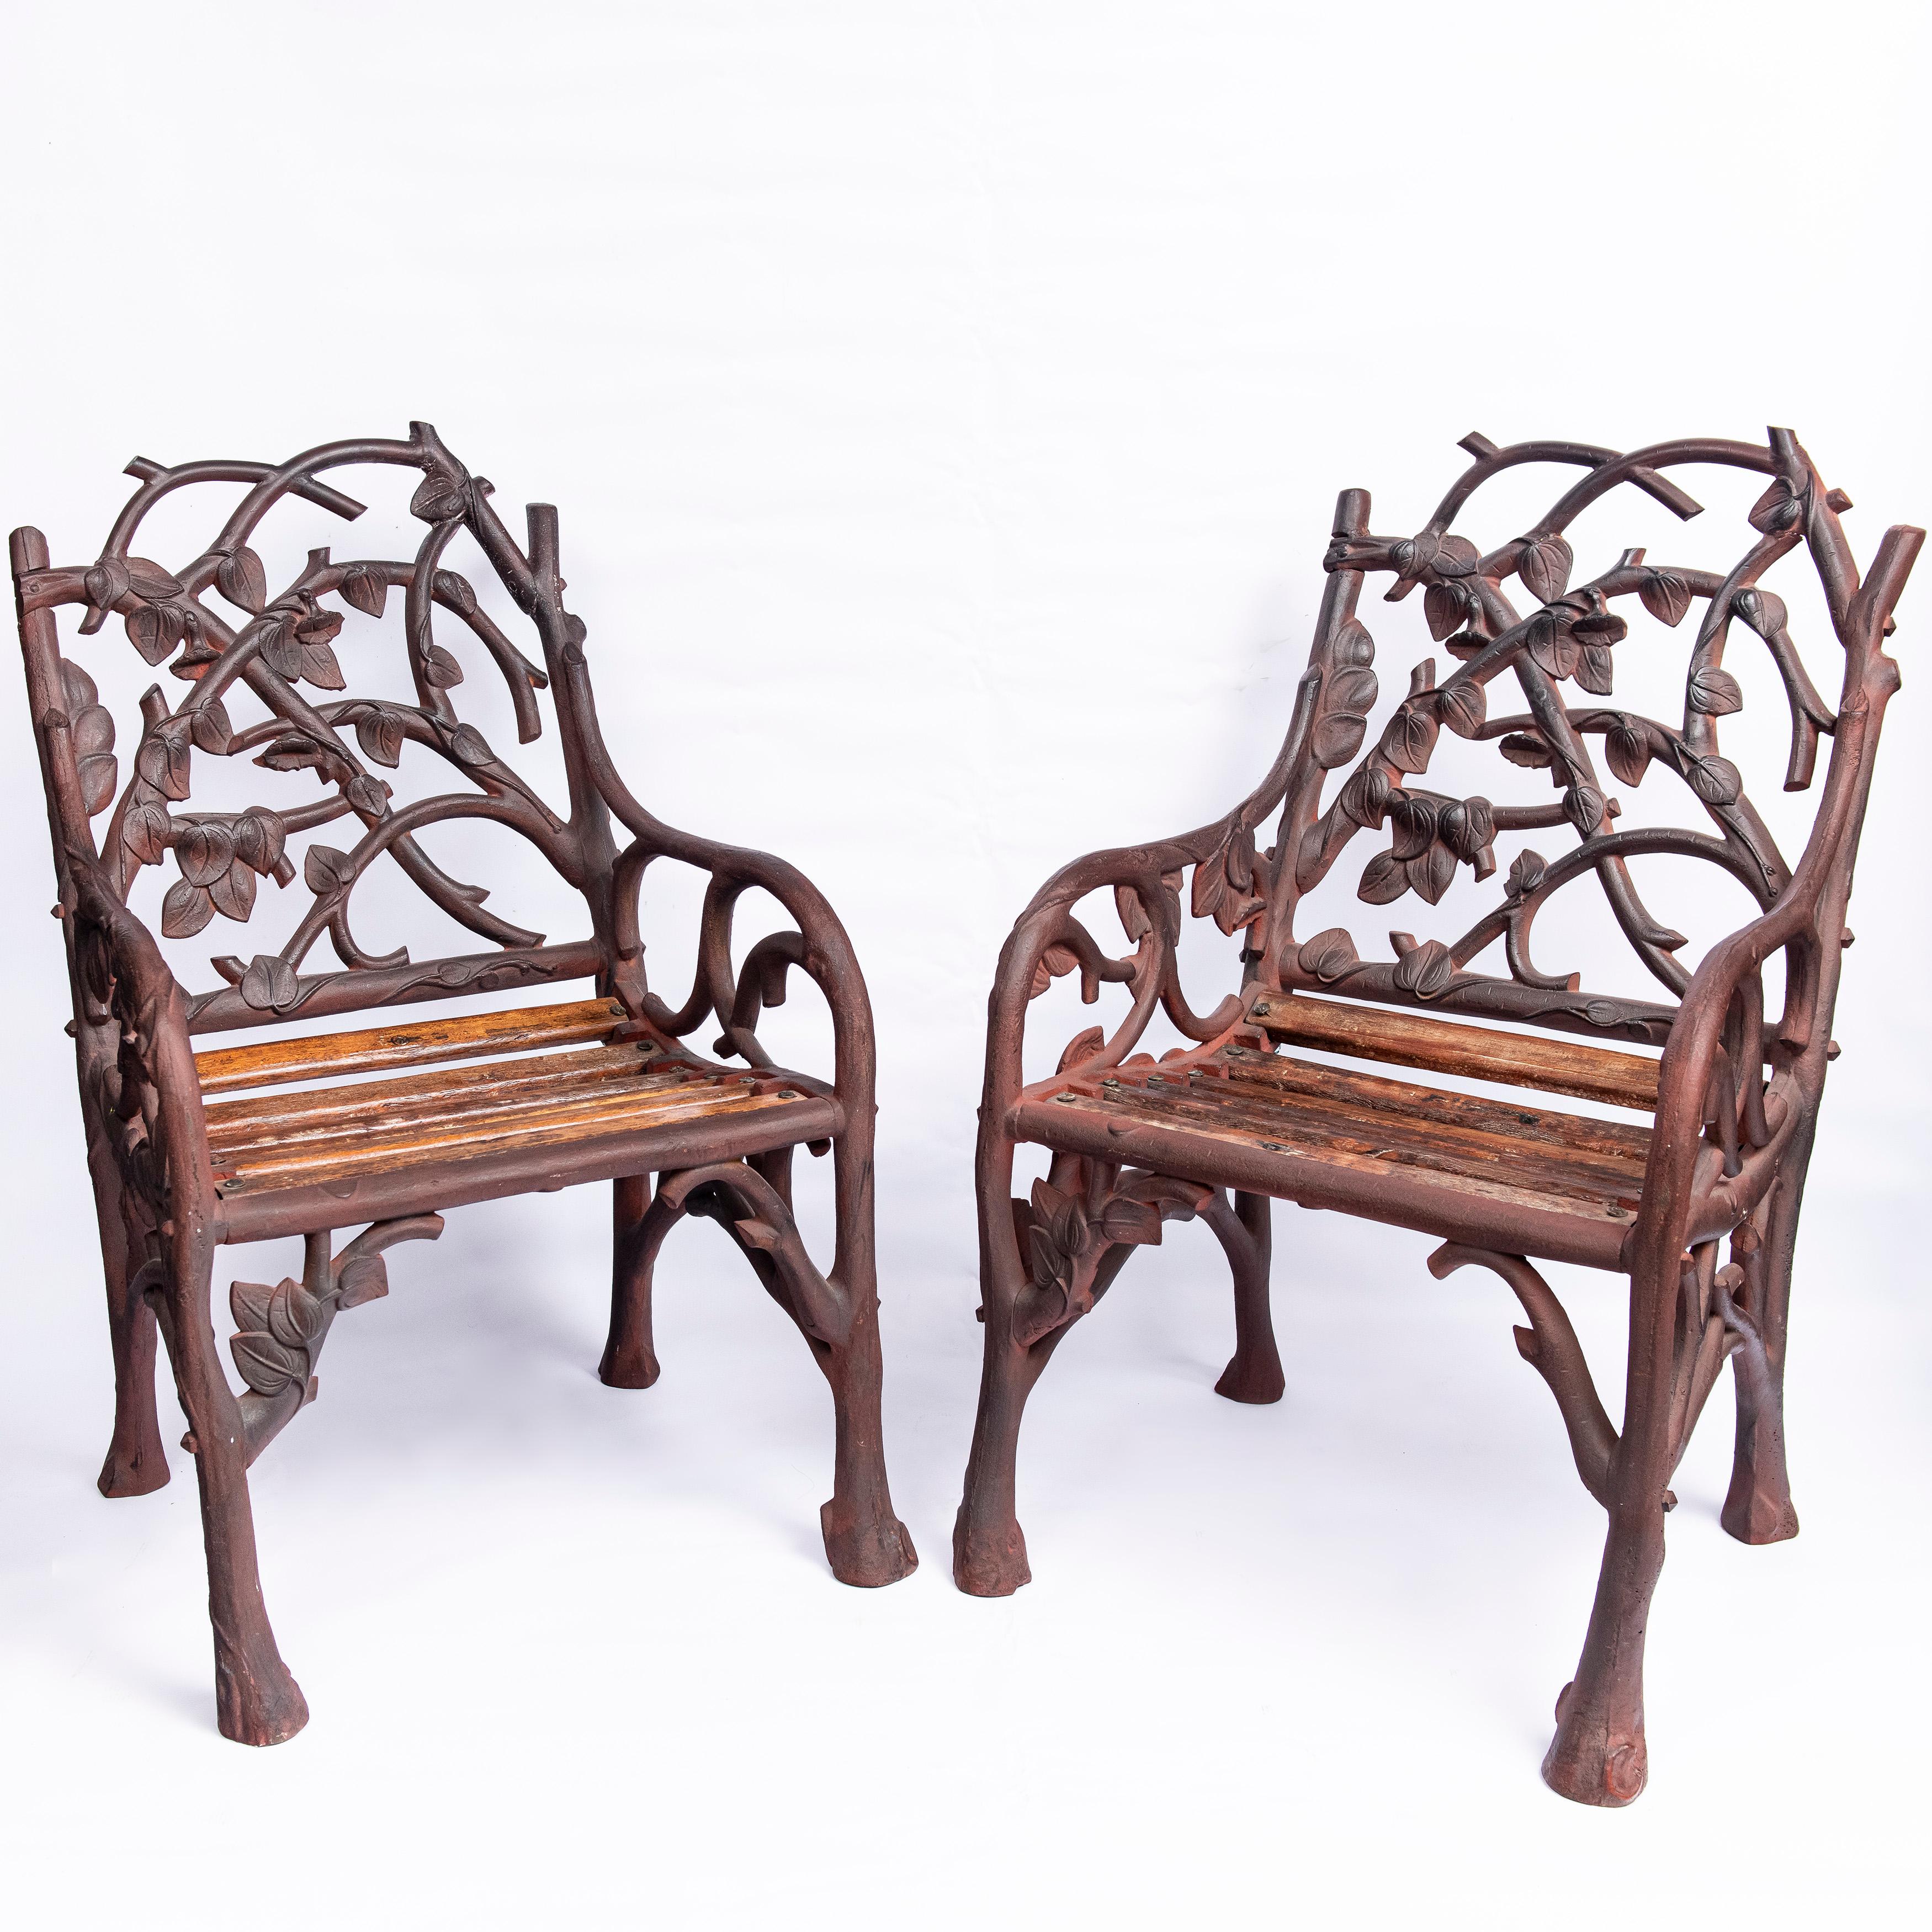 Cast Iron and Wood Garden Furniture Set, England, Late 19th Century For Sale 2